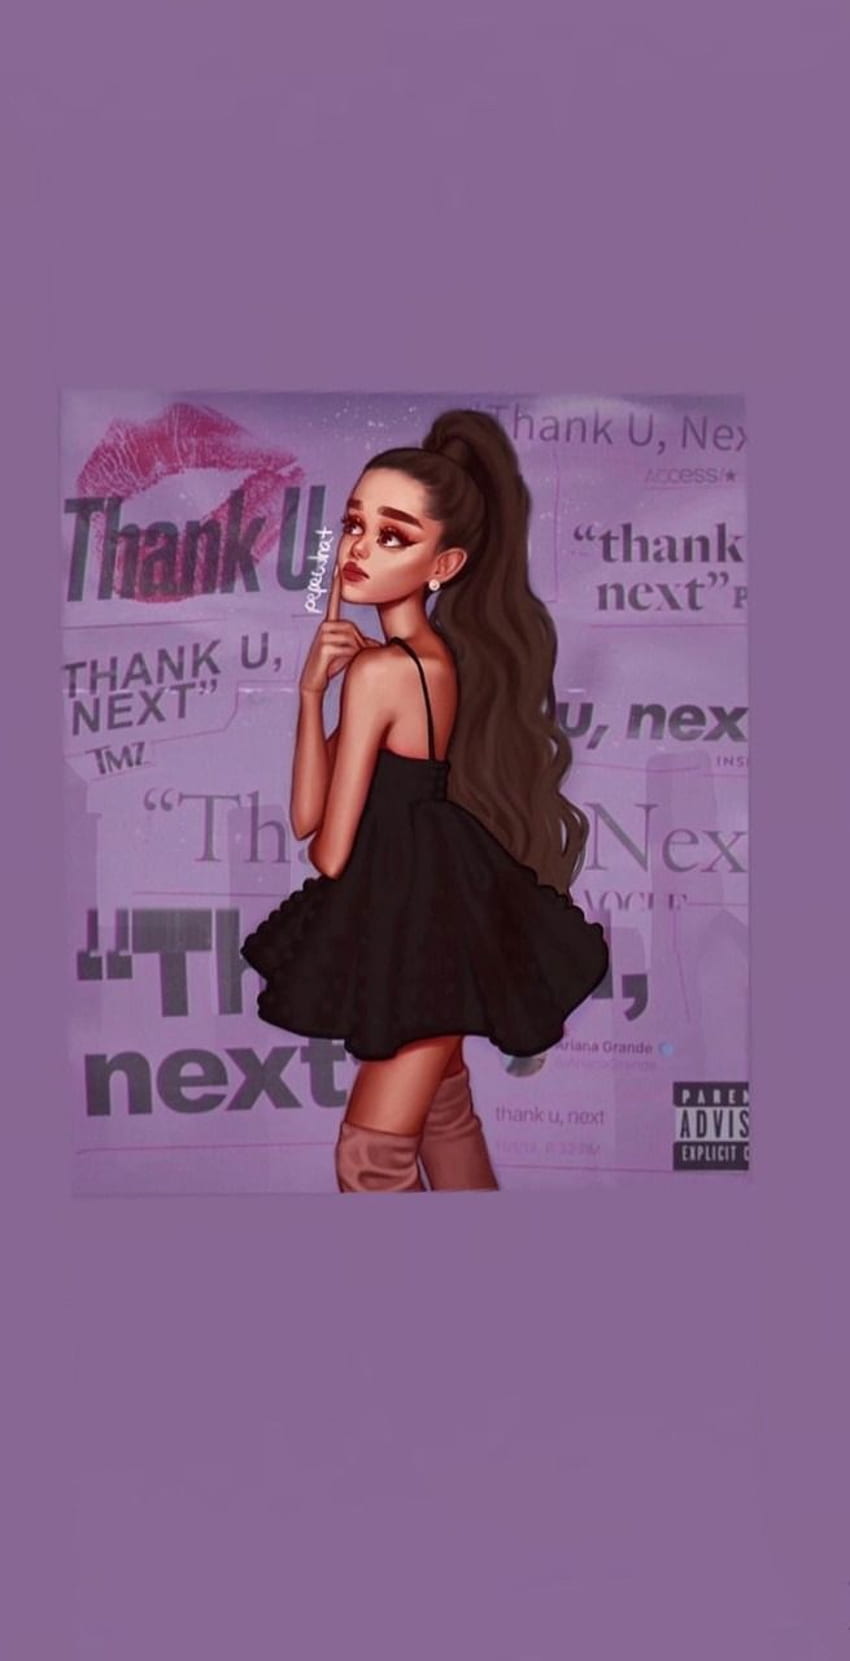 Lockscreens on X: Ariana Grande IPhone Wallpaper Follow us for more RT if  you want DM me all the wallpapers you want. #iphone #Wallpapers #Lockscreen  #DontCallmeAngel  / X